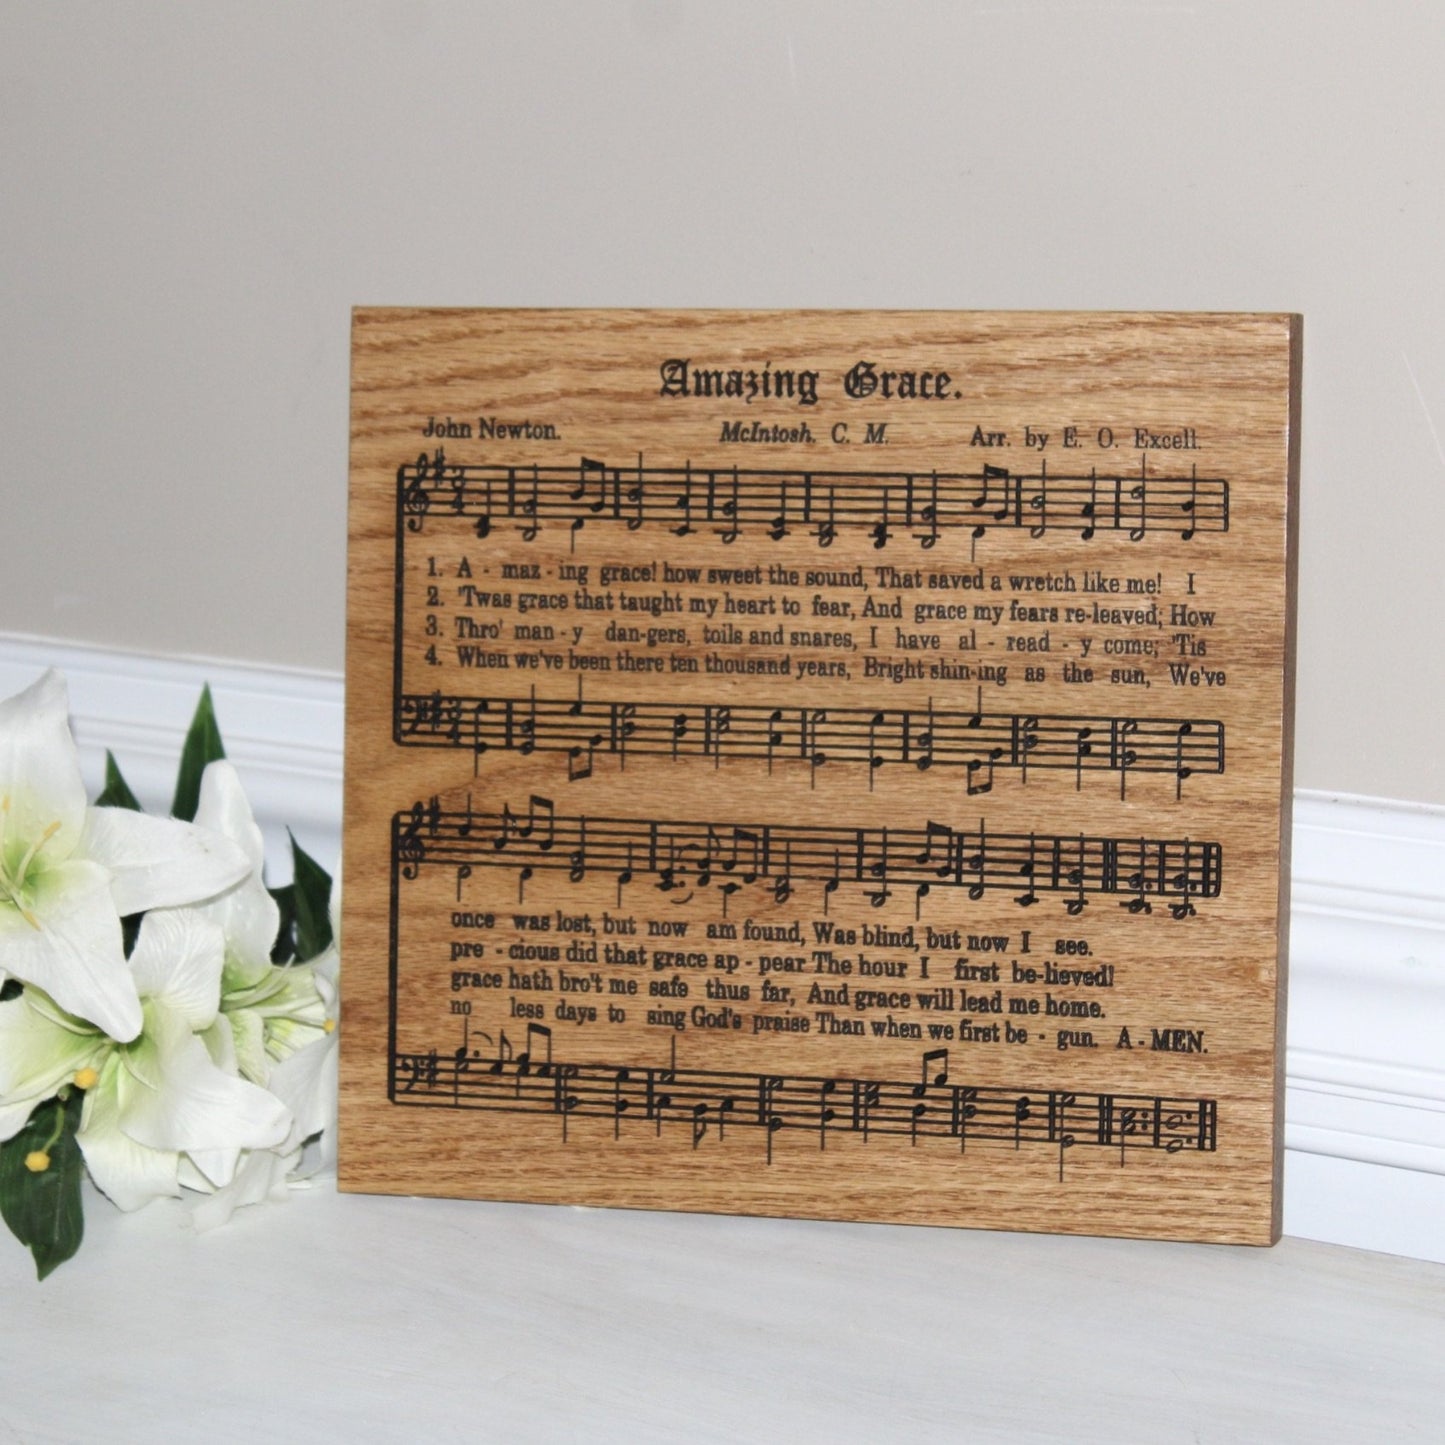 Amazing Grace Sheet Music Plaque Carved From Solid Wood